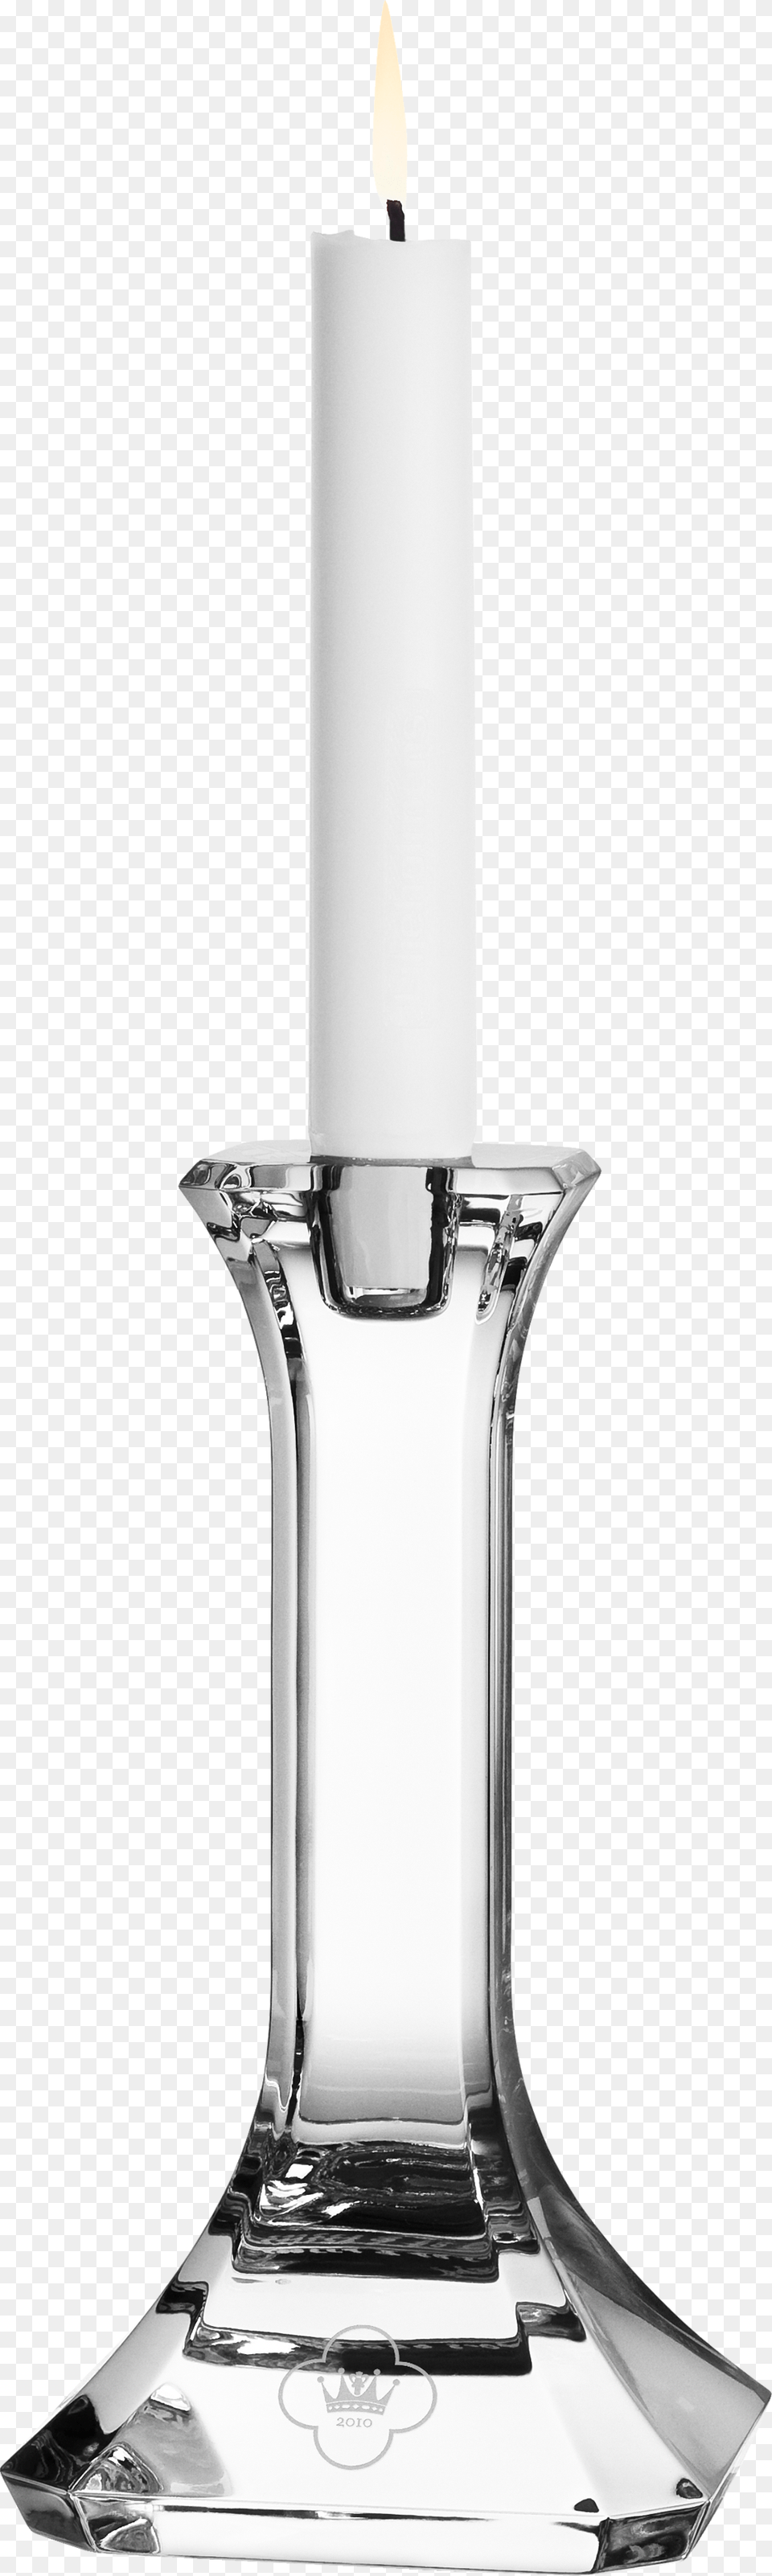 Candle, Candlestick, Blade, Dagger, Knife Png